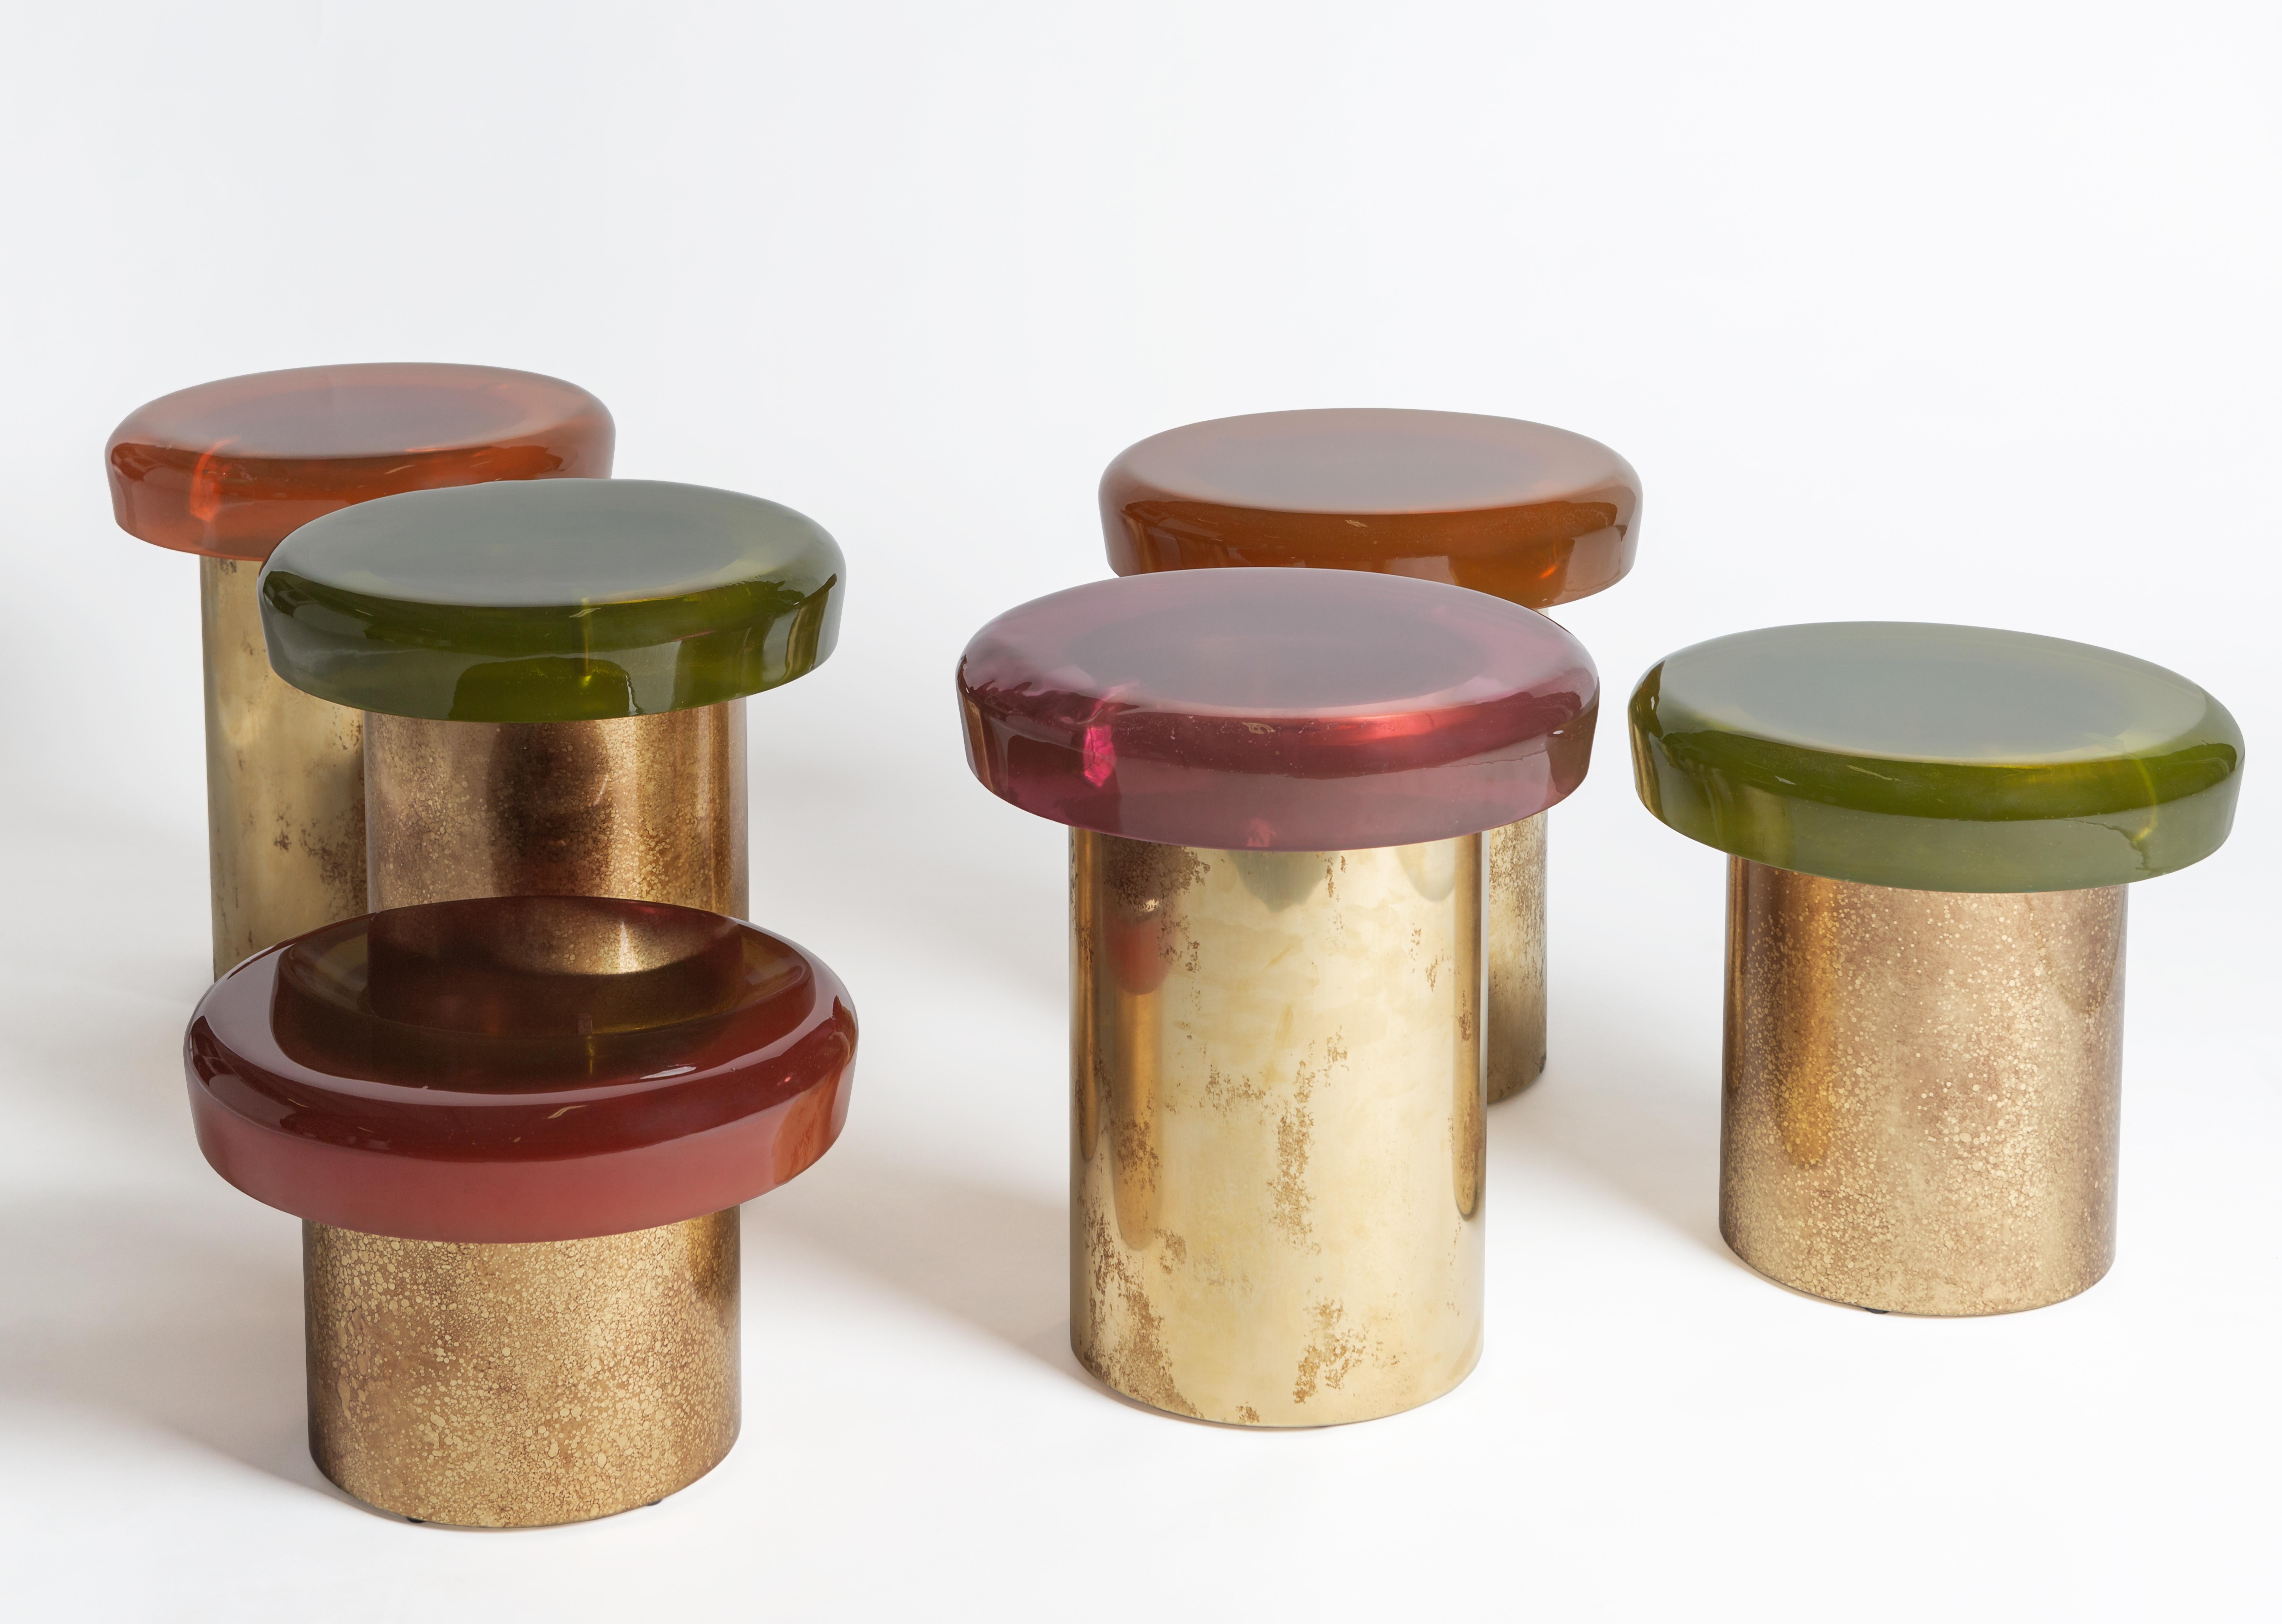 Transparency Matters collection by Draga & Aurel:
Stool formed from cast resin and solid brass. The finished product looks like a precious gem. Handcrafted in our Atelier in Como. Each piece is unique.
Orange light color, size: Ø 40, H 46
Please